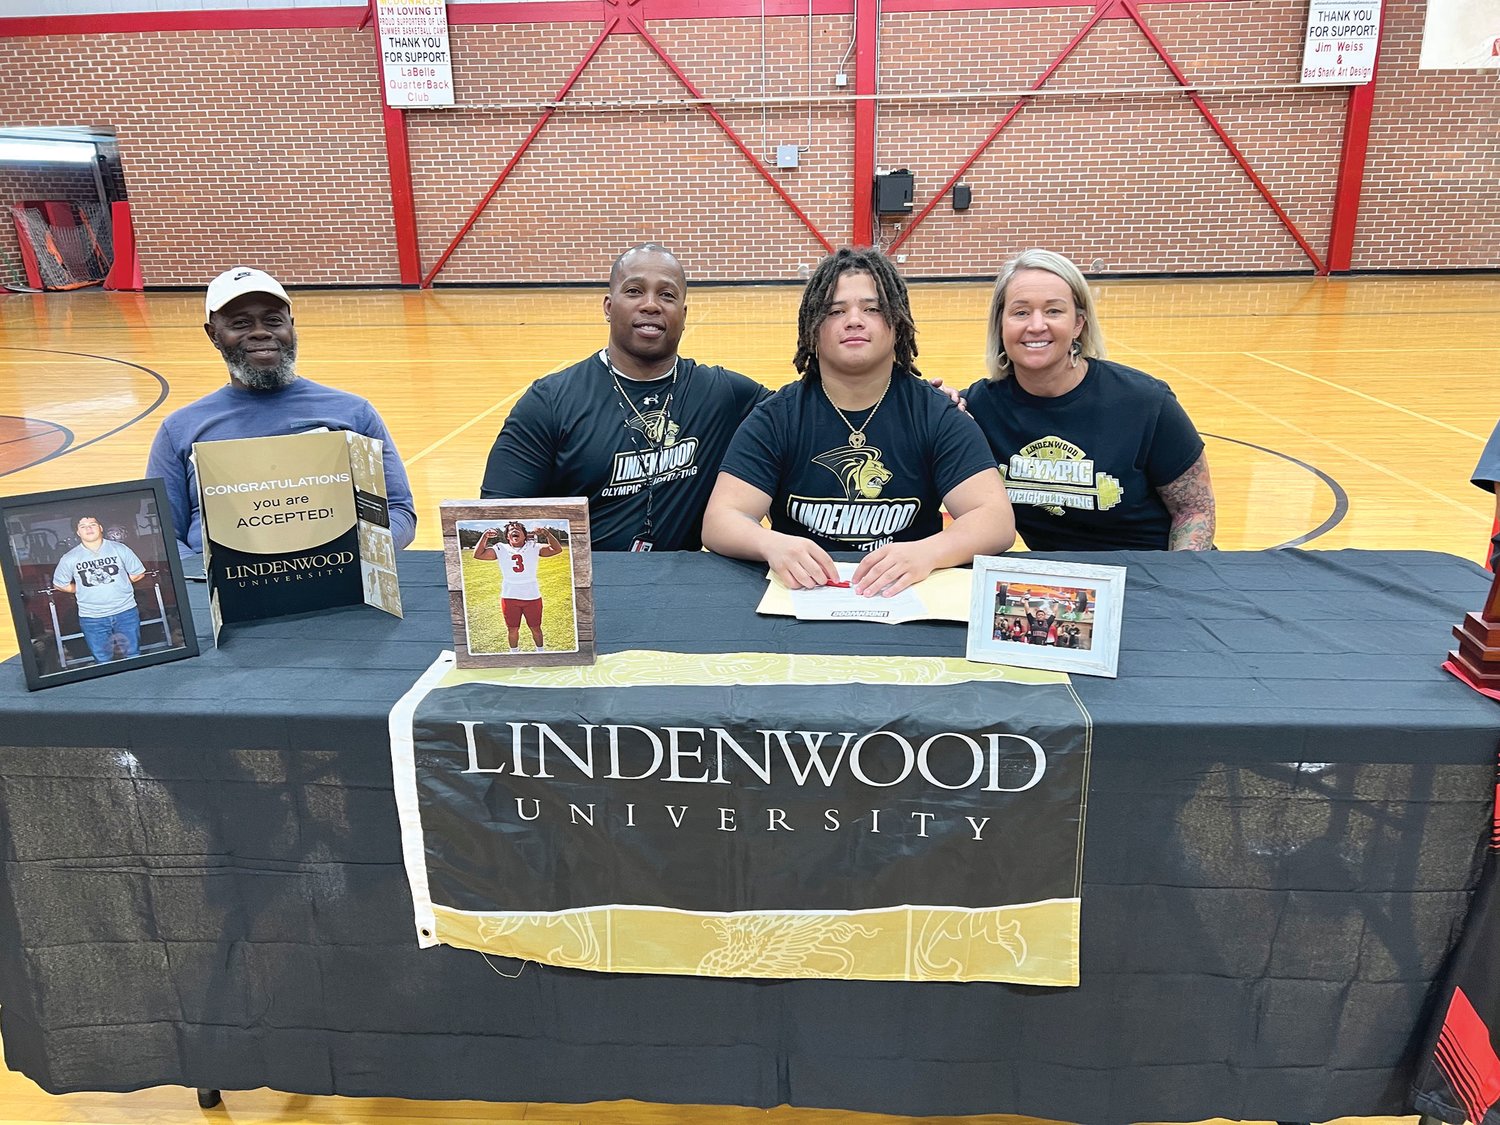 Maurice “Reece” McClain, Jr., signed his letter of intent to be an olympic weightlifter for Lindenwood University in St. Charles, Missouri.